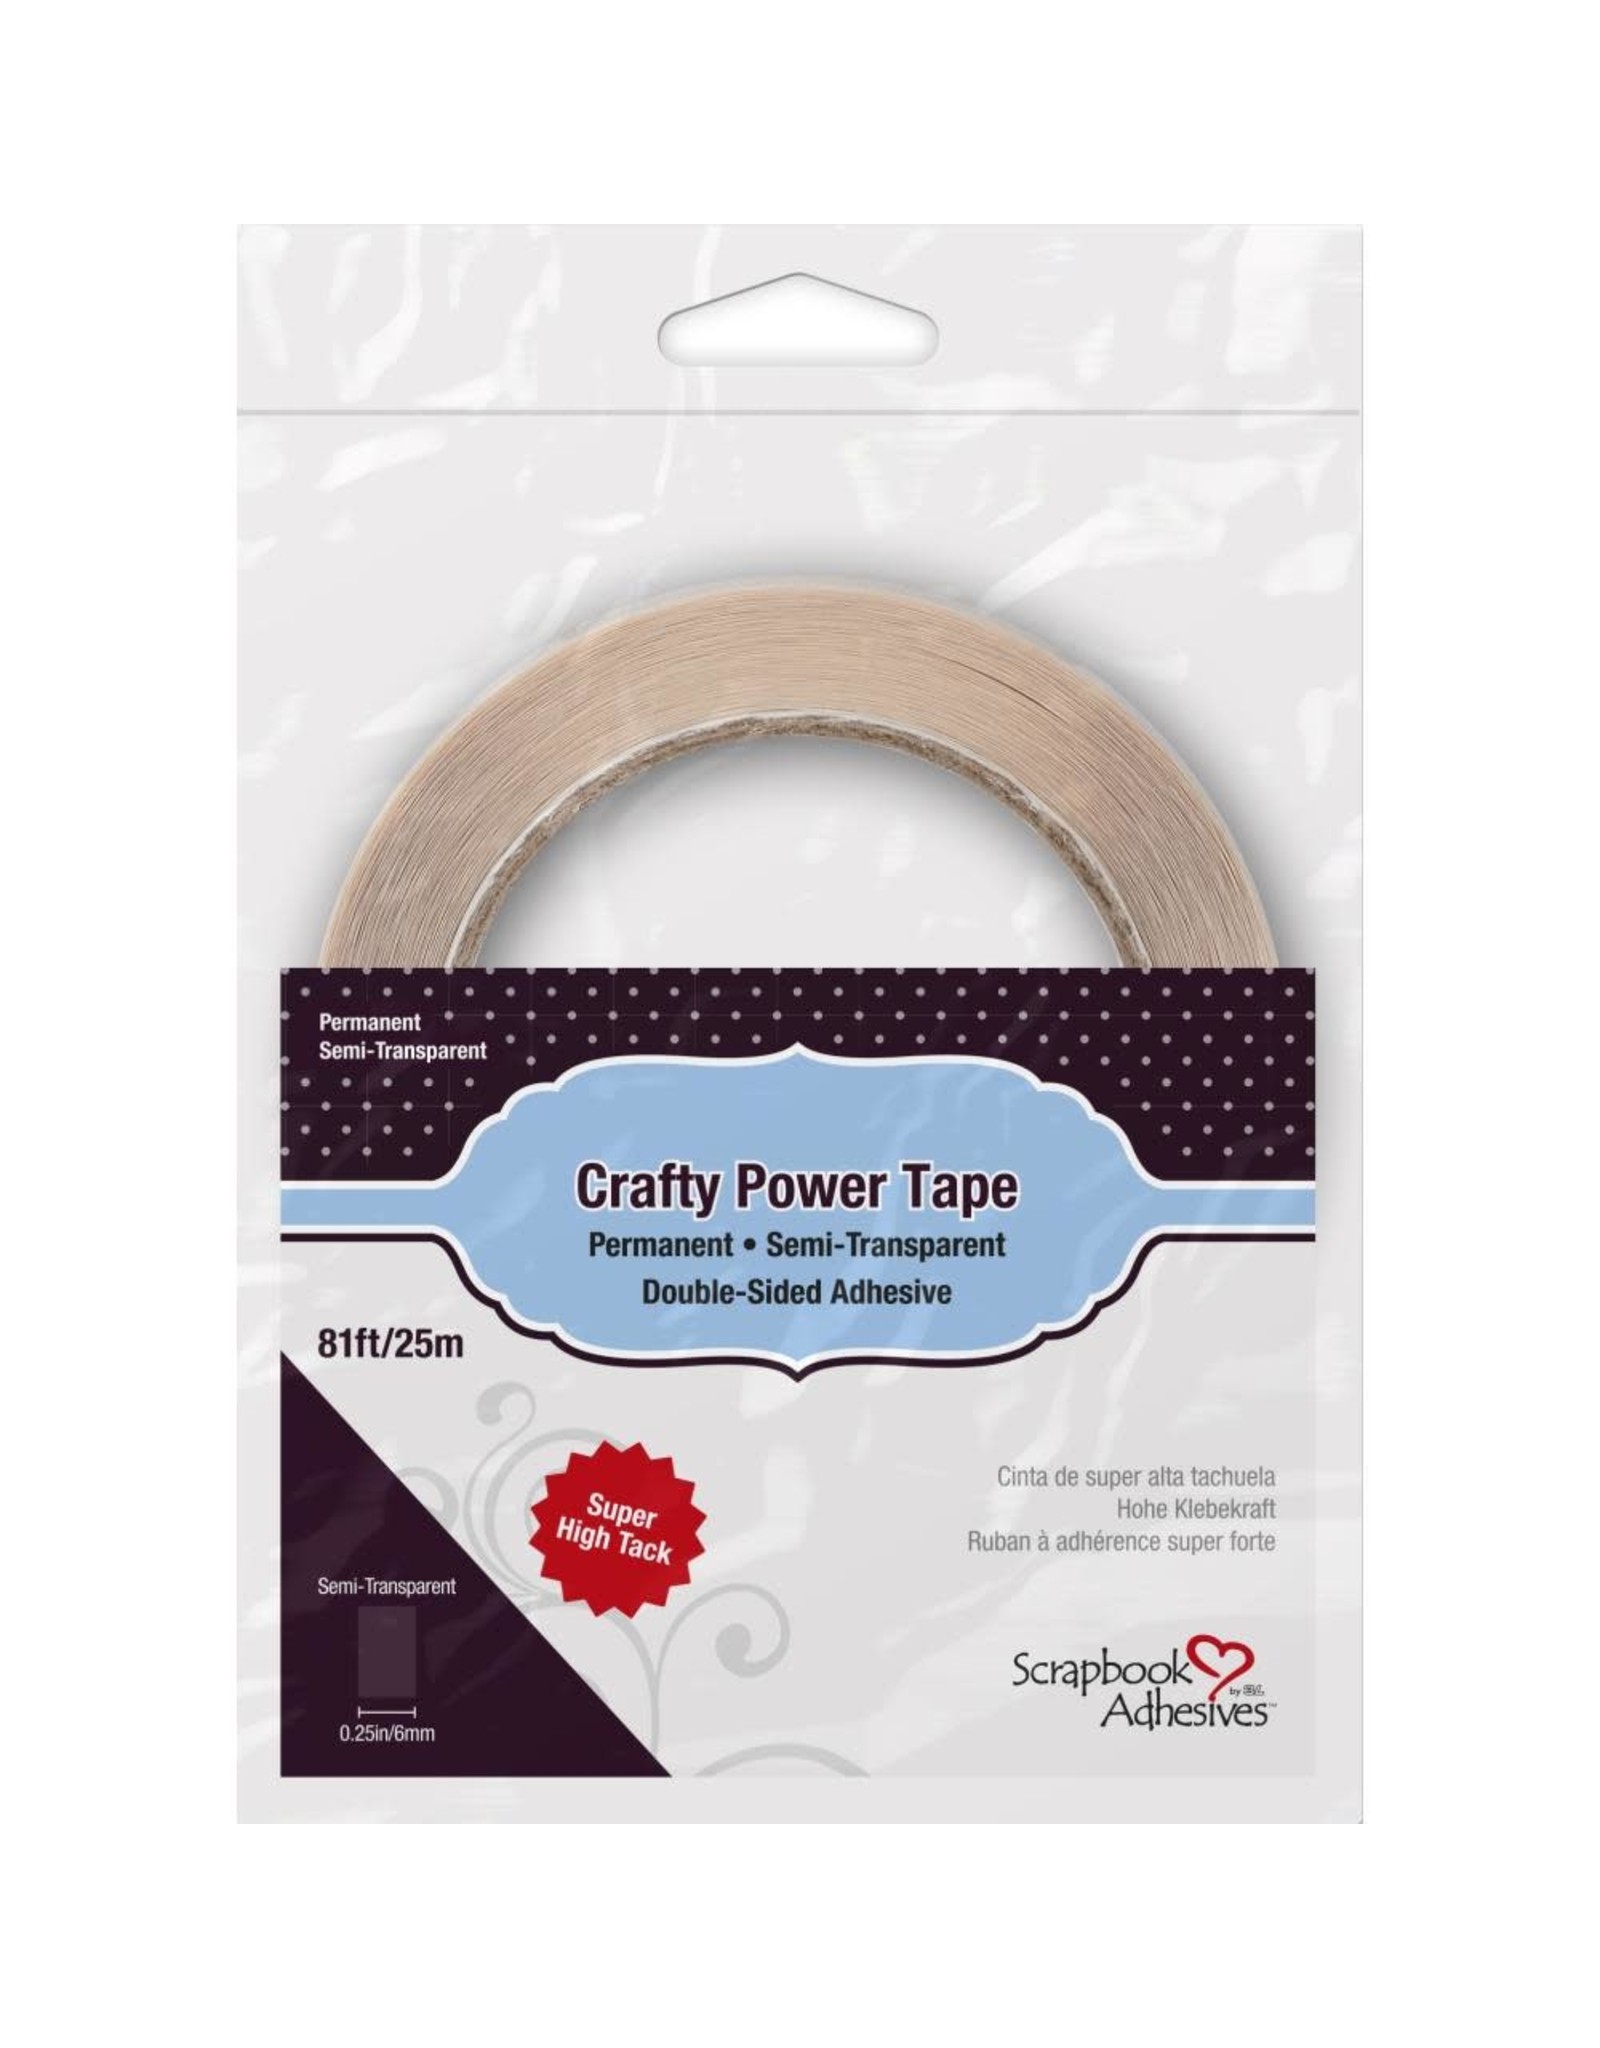 3L SCRAPBOOK ADHESIVES CRAFTY POWER TAPE ROLL 25m